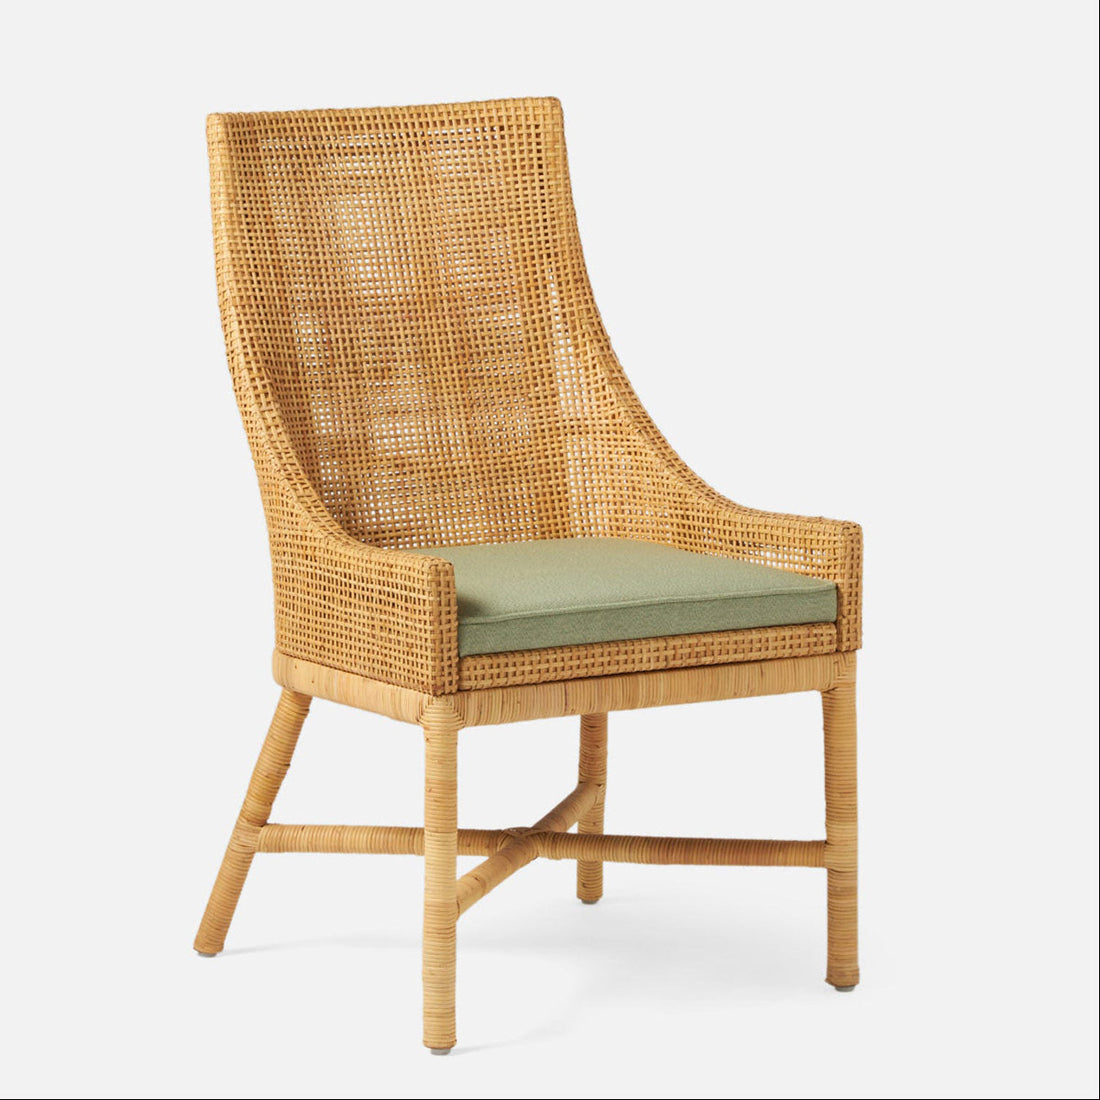 Made Goods Isla Woven Rattan Dining Chair in Danube Fabric